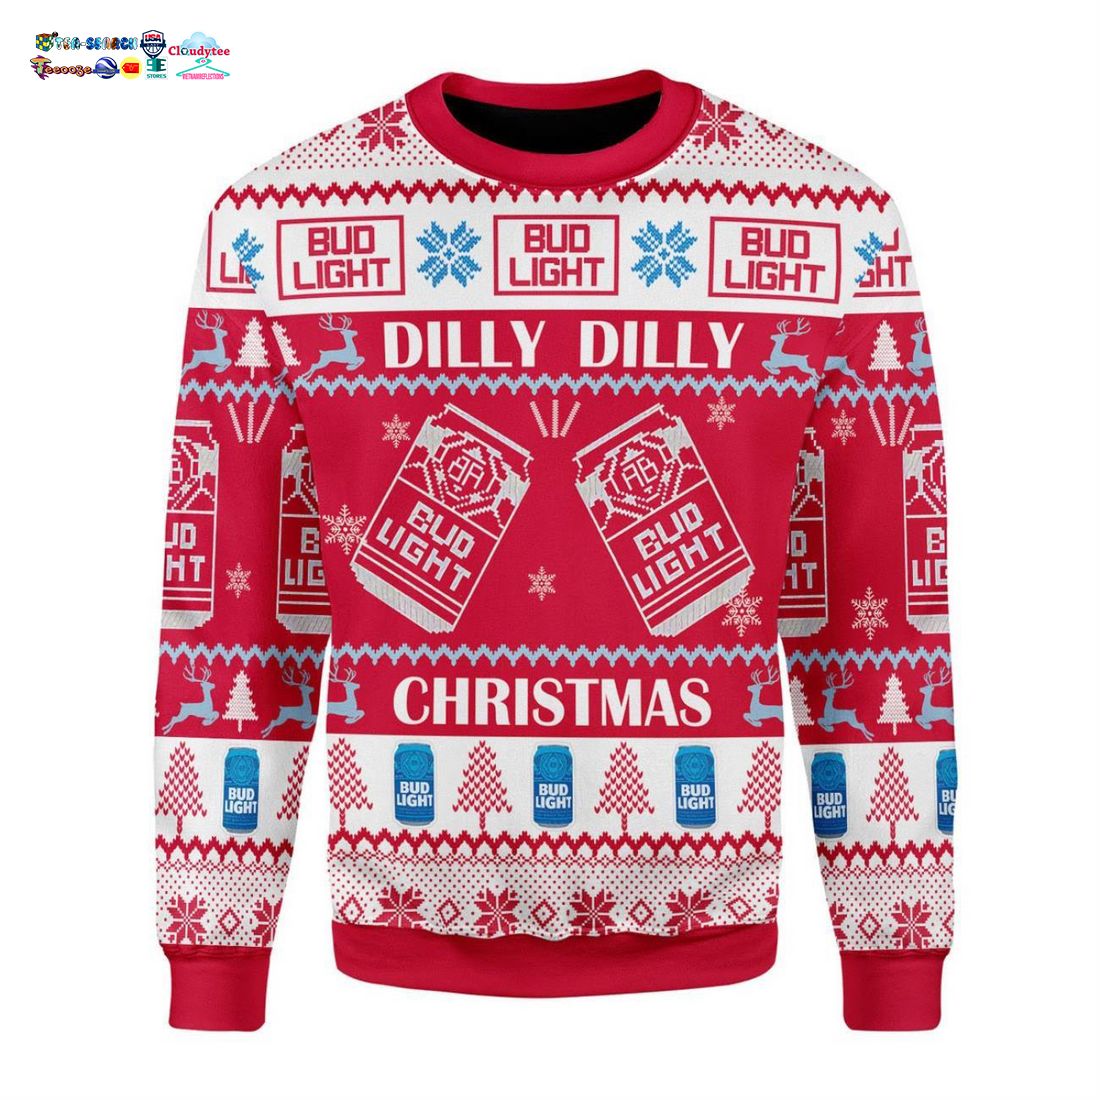 Bud Light Dilly Dilly Christmas Ugly Christmas Sweater